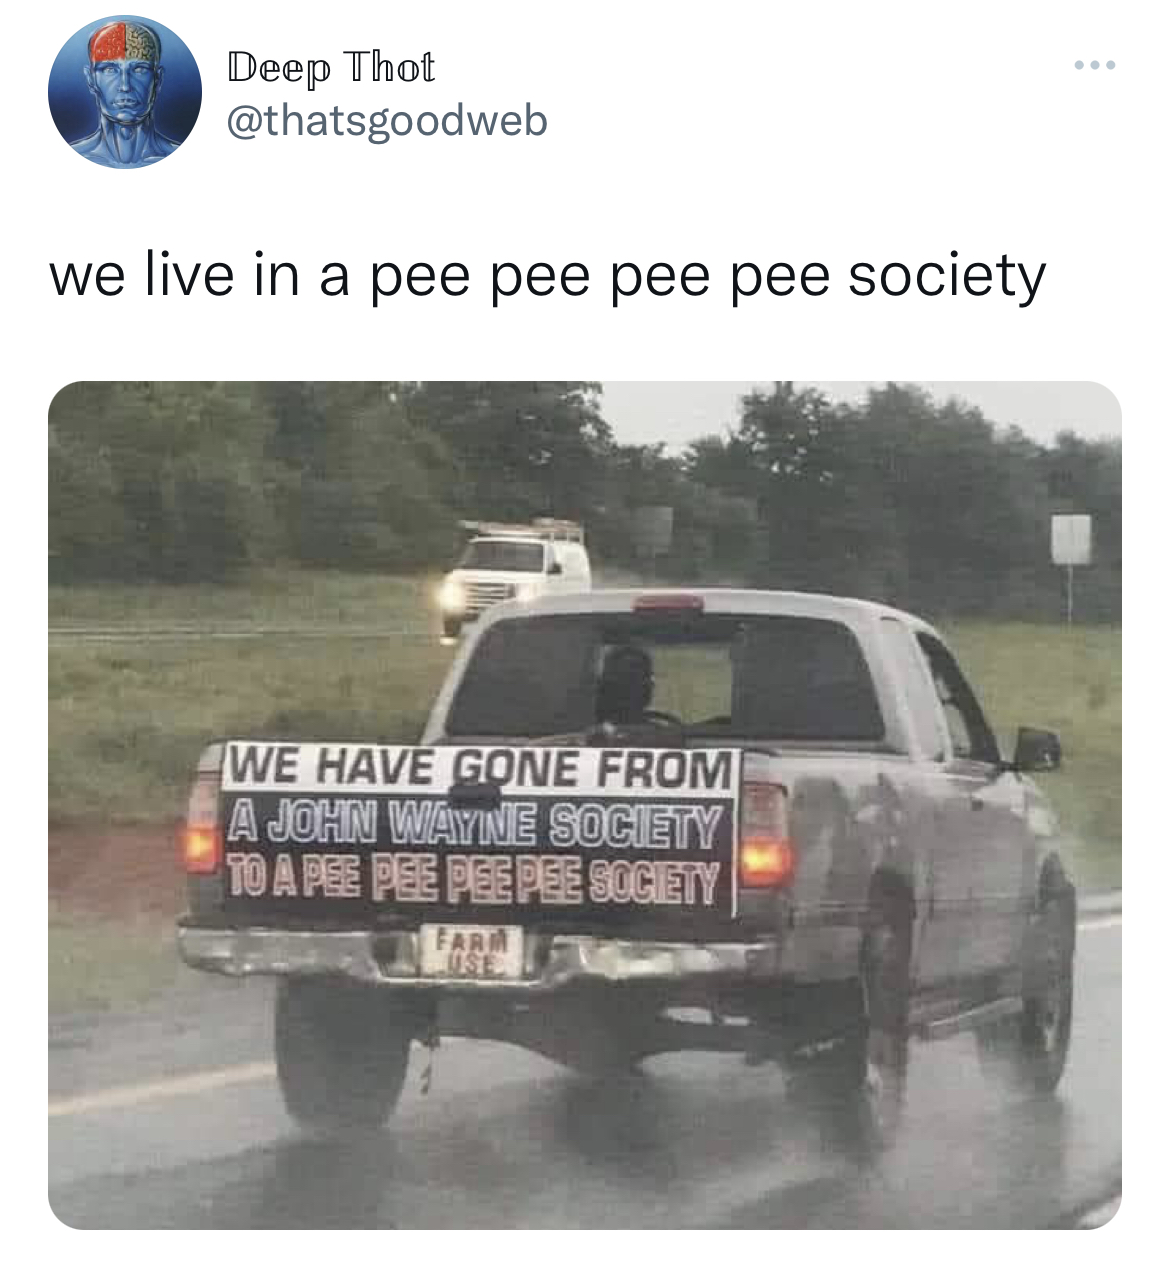 Savage and hilarious tweets - bumper - Deep Thot we live in a pee pee pee pee society We Have Gone From A John Wayne Society To A Pee Pee Pee Pee Society Farm Ose